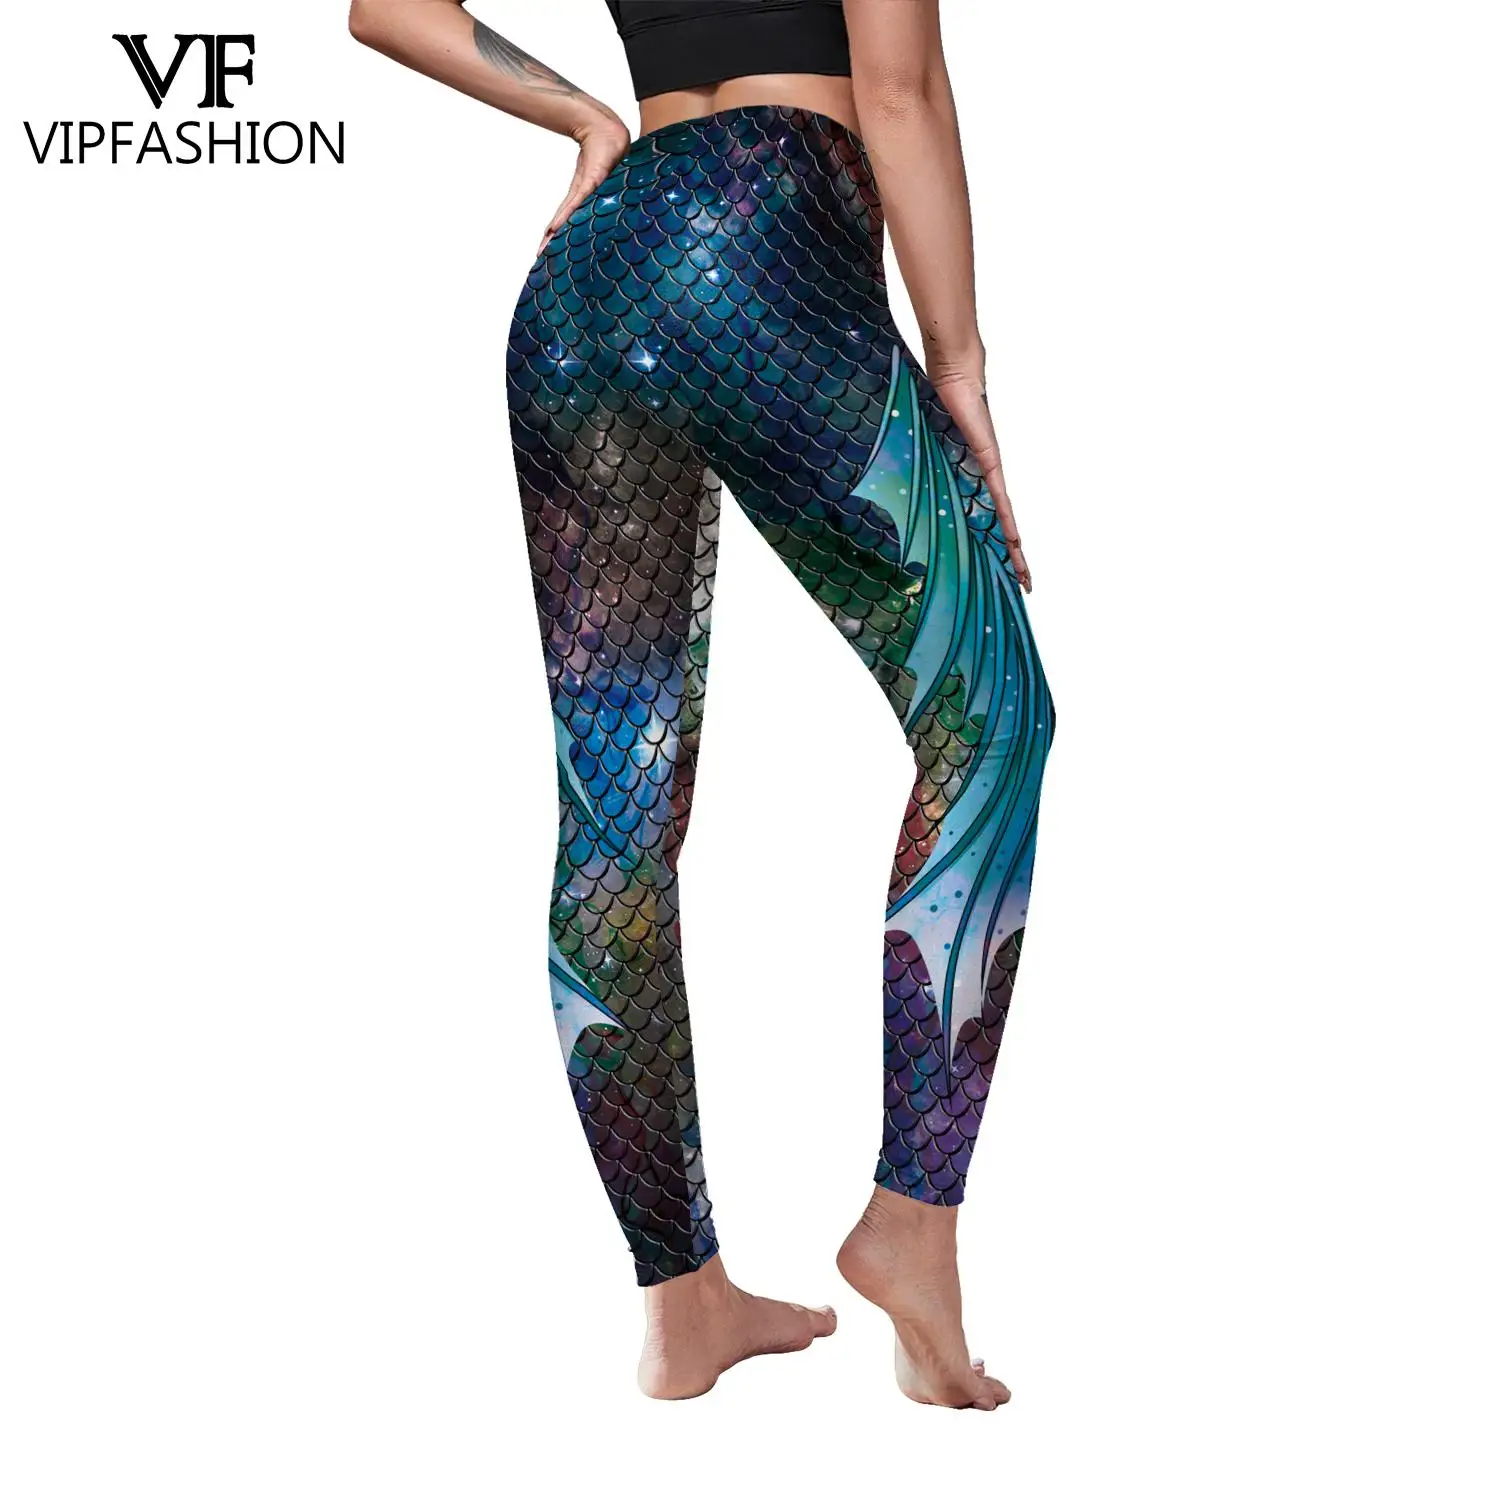 VIP FASHION Leggings for Women Fitness Sport Mermaid with Printed Fish Scales Shiny Leggings Workout Elasticity Lggins images - 6